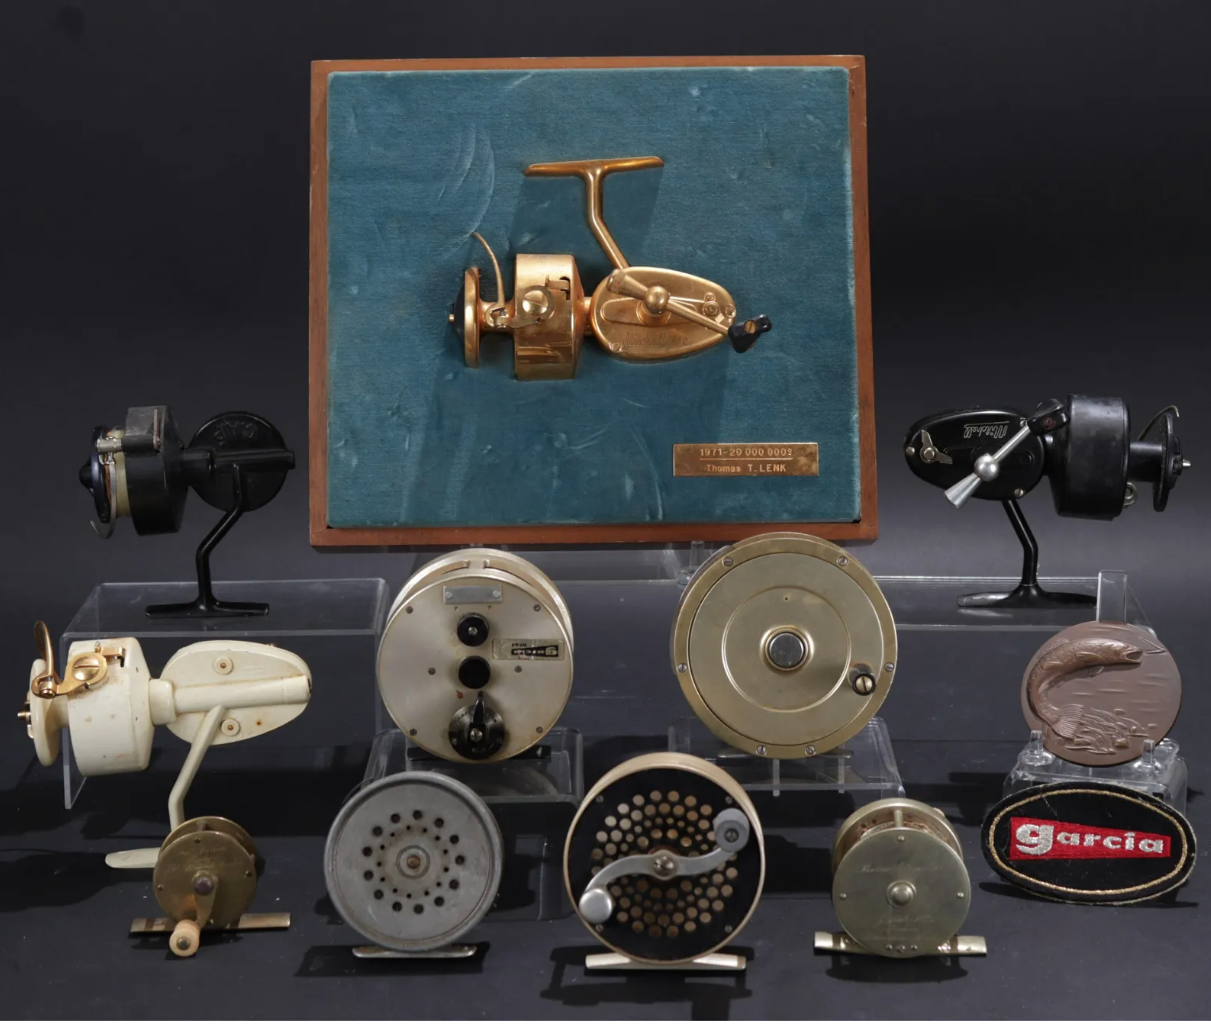 A collection of fishing reels, including ones by Mitchell, Garcia, Fin-Nor and Hardy, attained $21,000 plus the buyer’s premium in October 2021. Image courtesy of Litchfield Auctions and LiveAuctioneers.